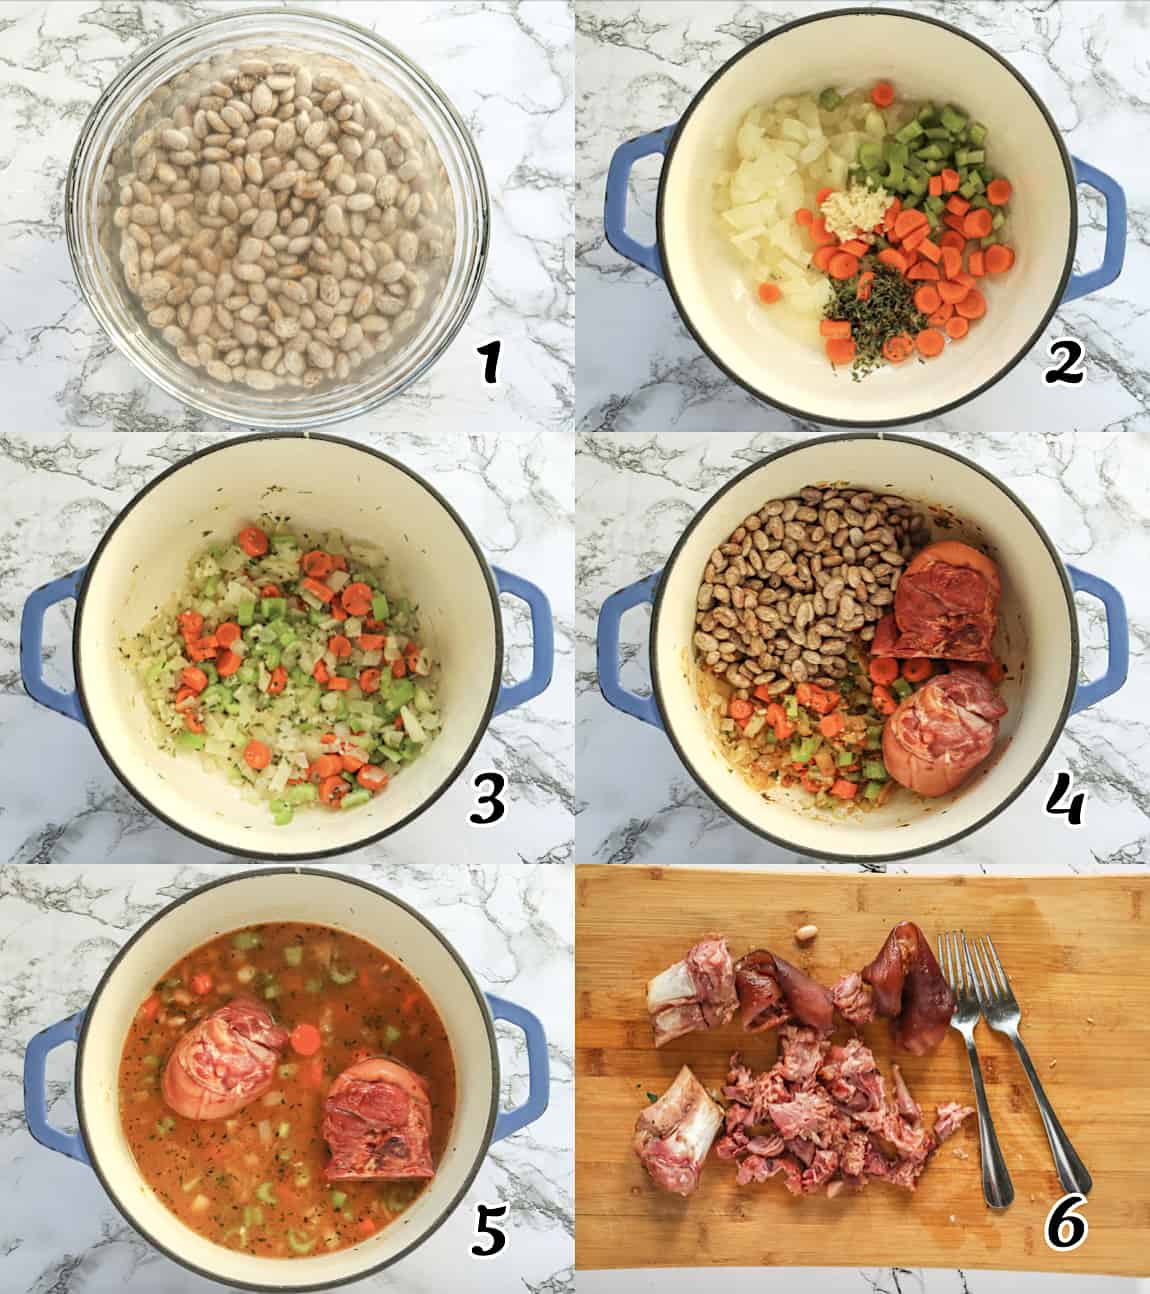 Soak legumes, saute veggies, add flavorings and broth, and simmer to perfection